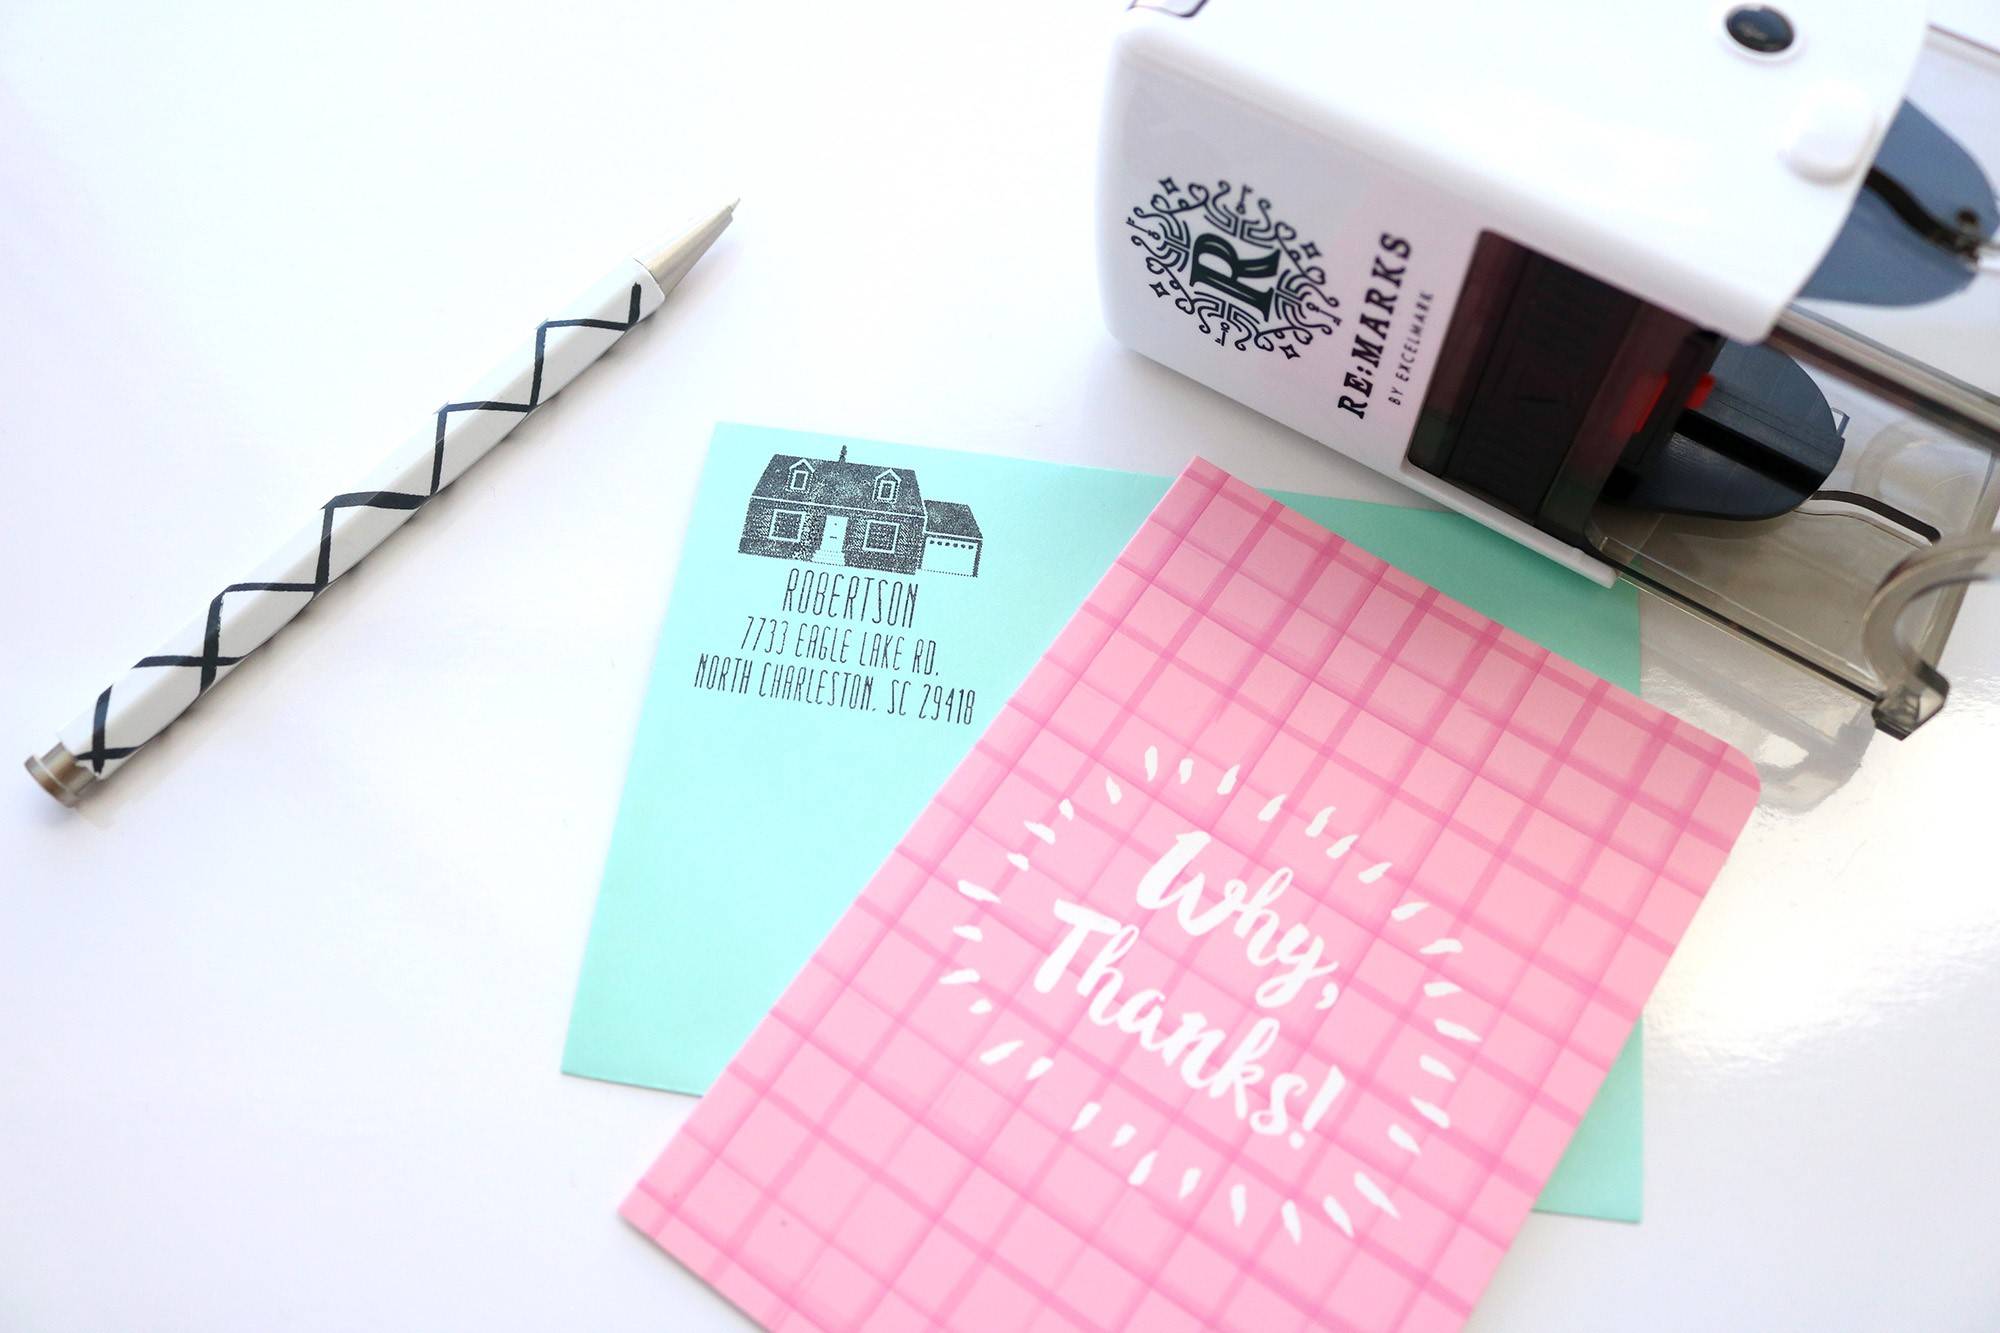 Self-Inking stamp sitting next to a thank you card